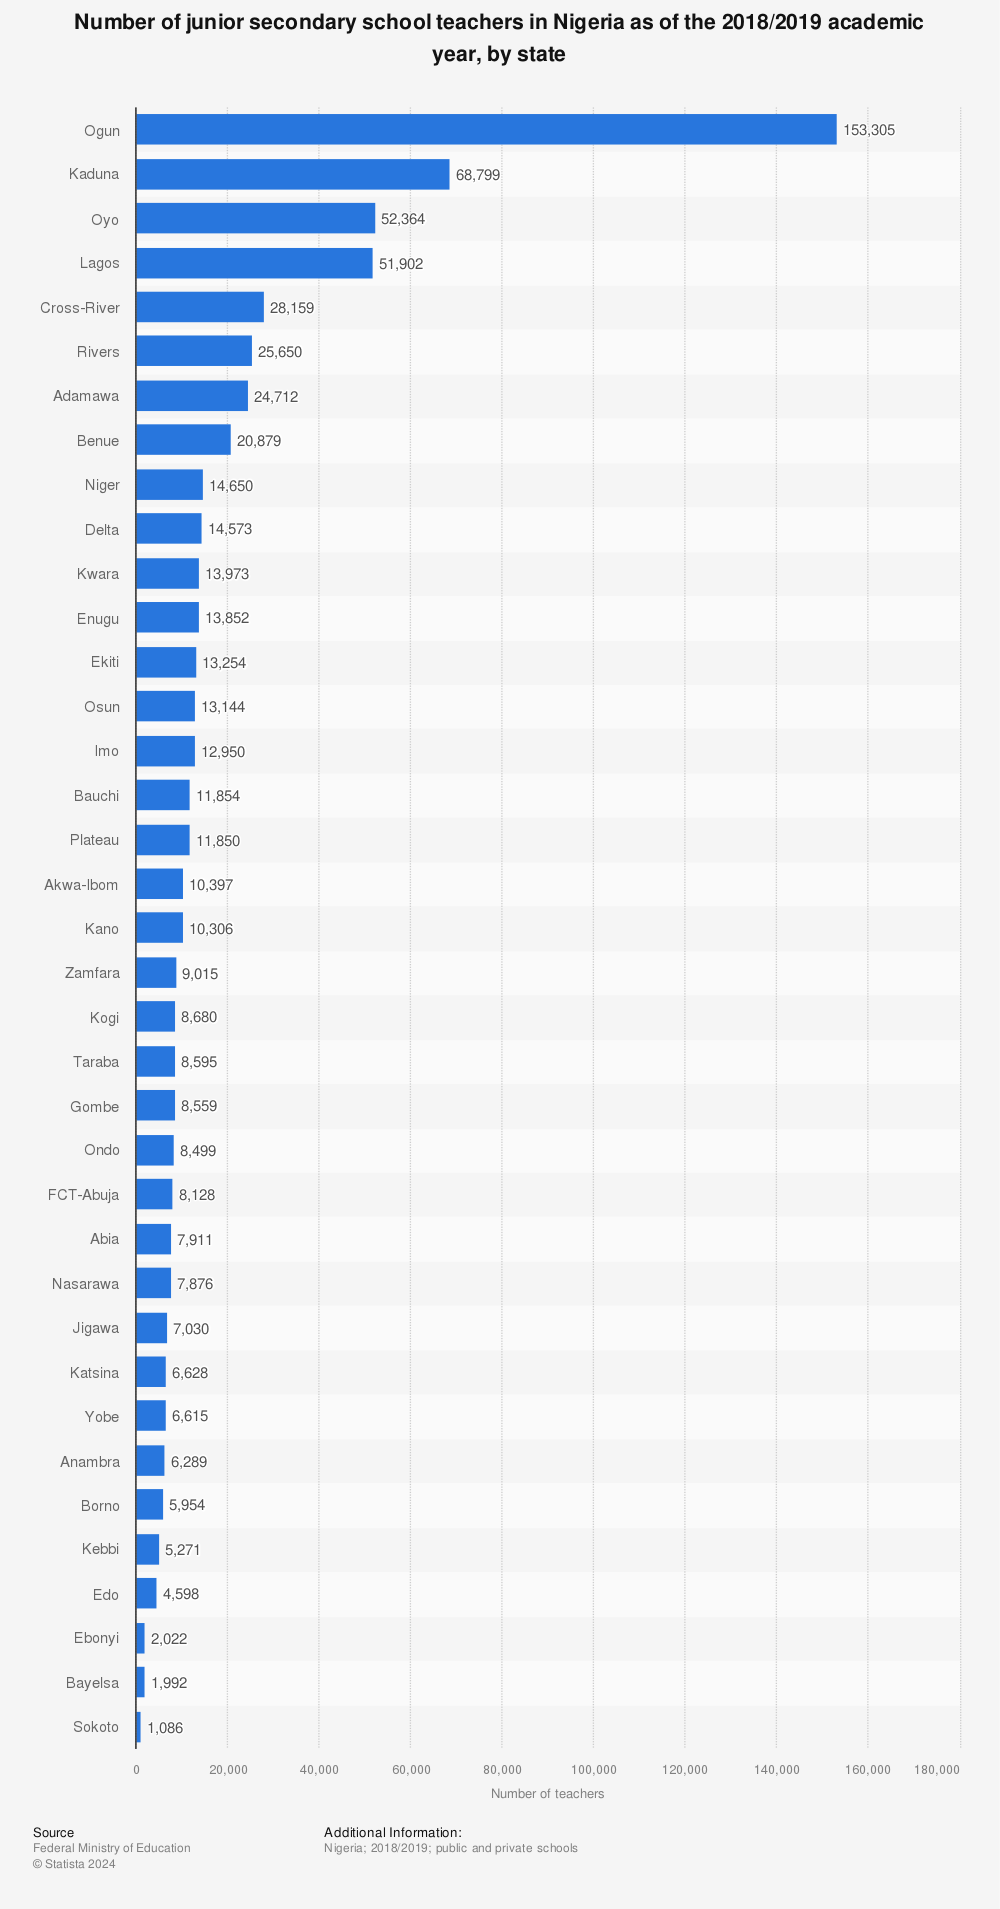 Statistic: Number of junior secondary school teachers in Nigeria as of the 2018/2019 academic year, by state | Statista